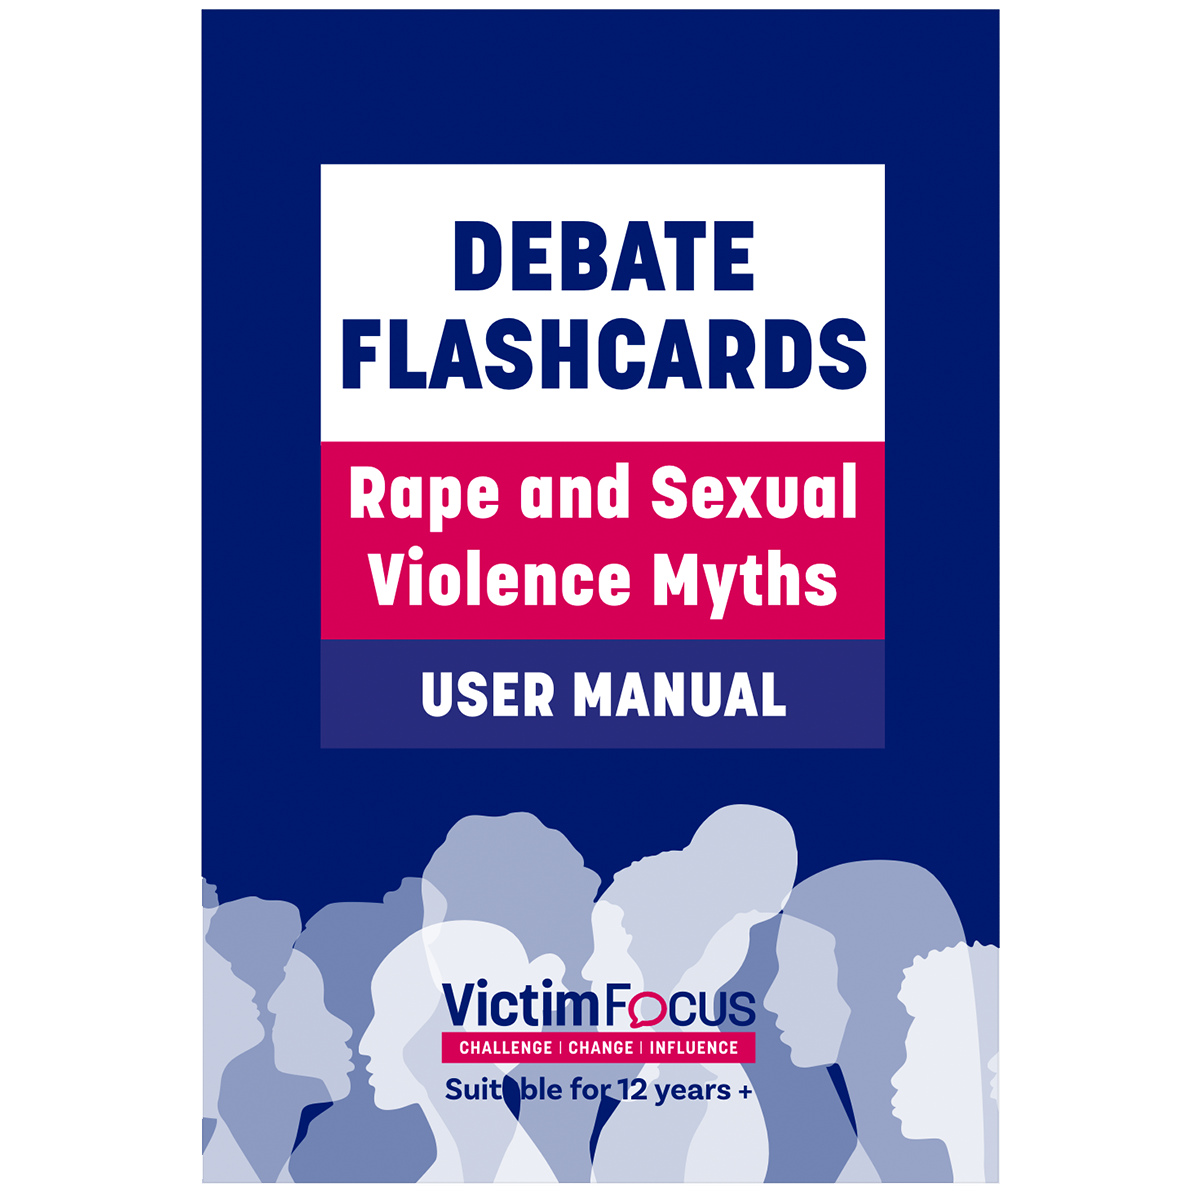 Debate Flashcards: Rape and Sexual Violence Myths - Digital Flashcards and Resource